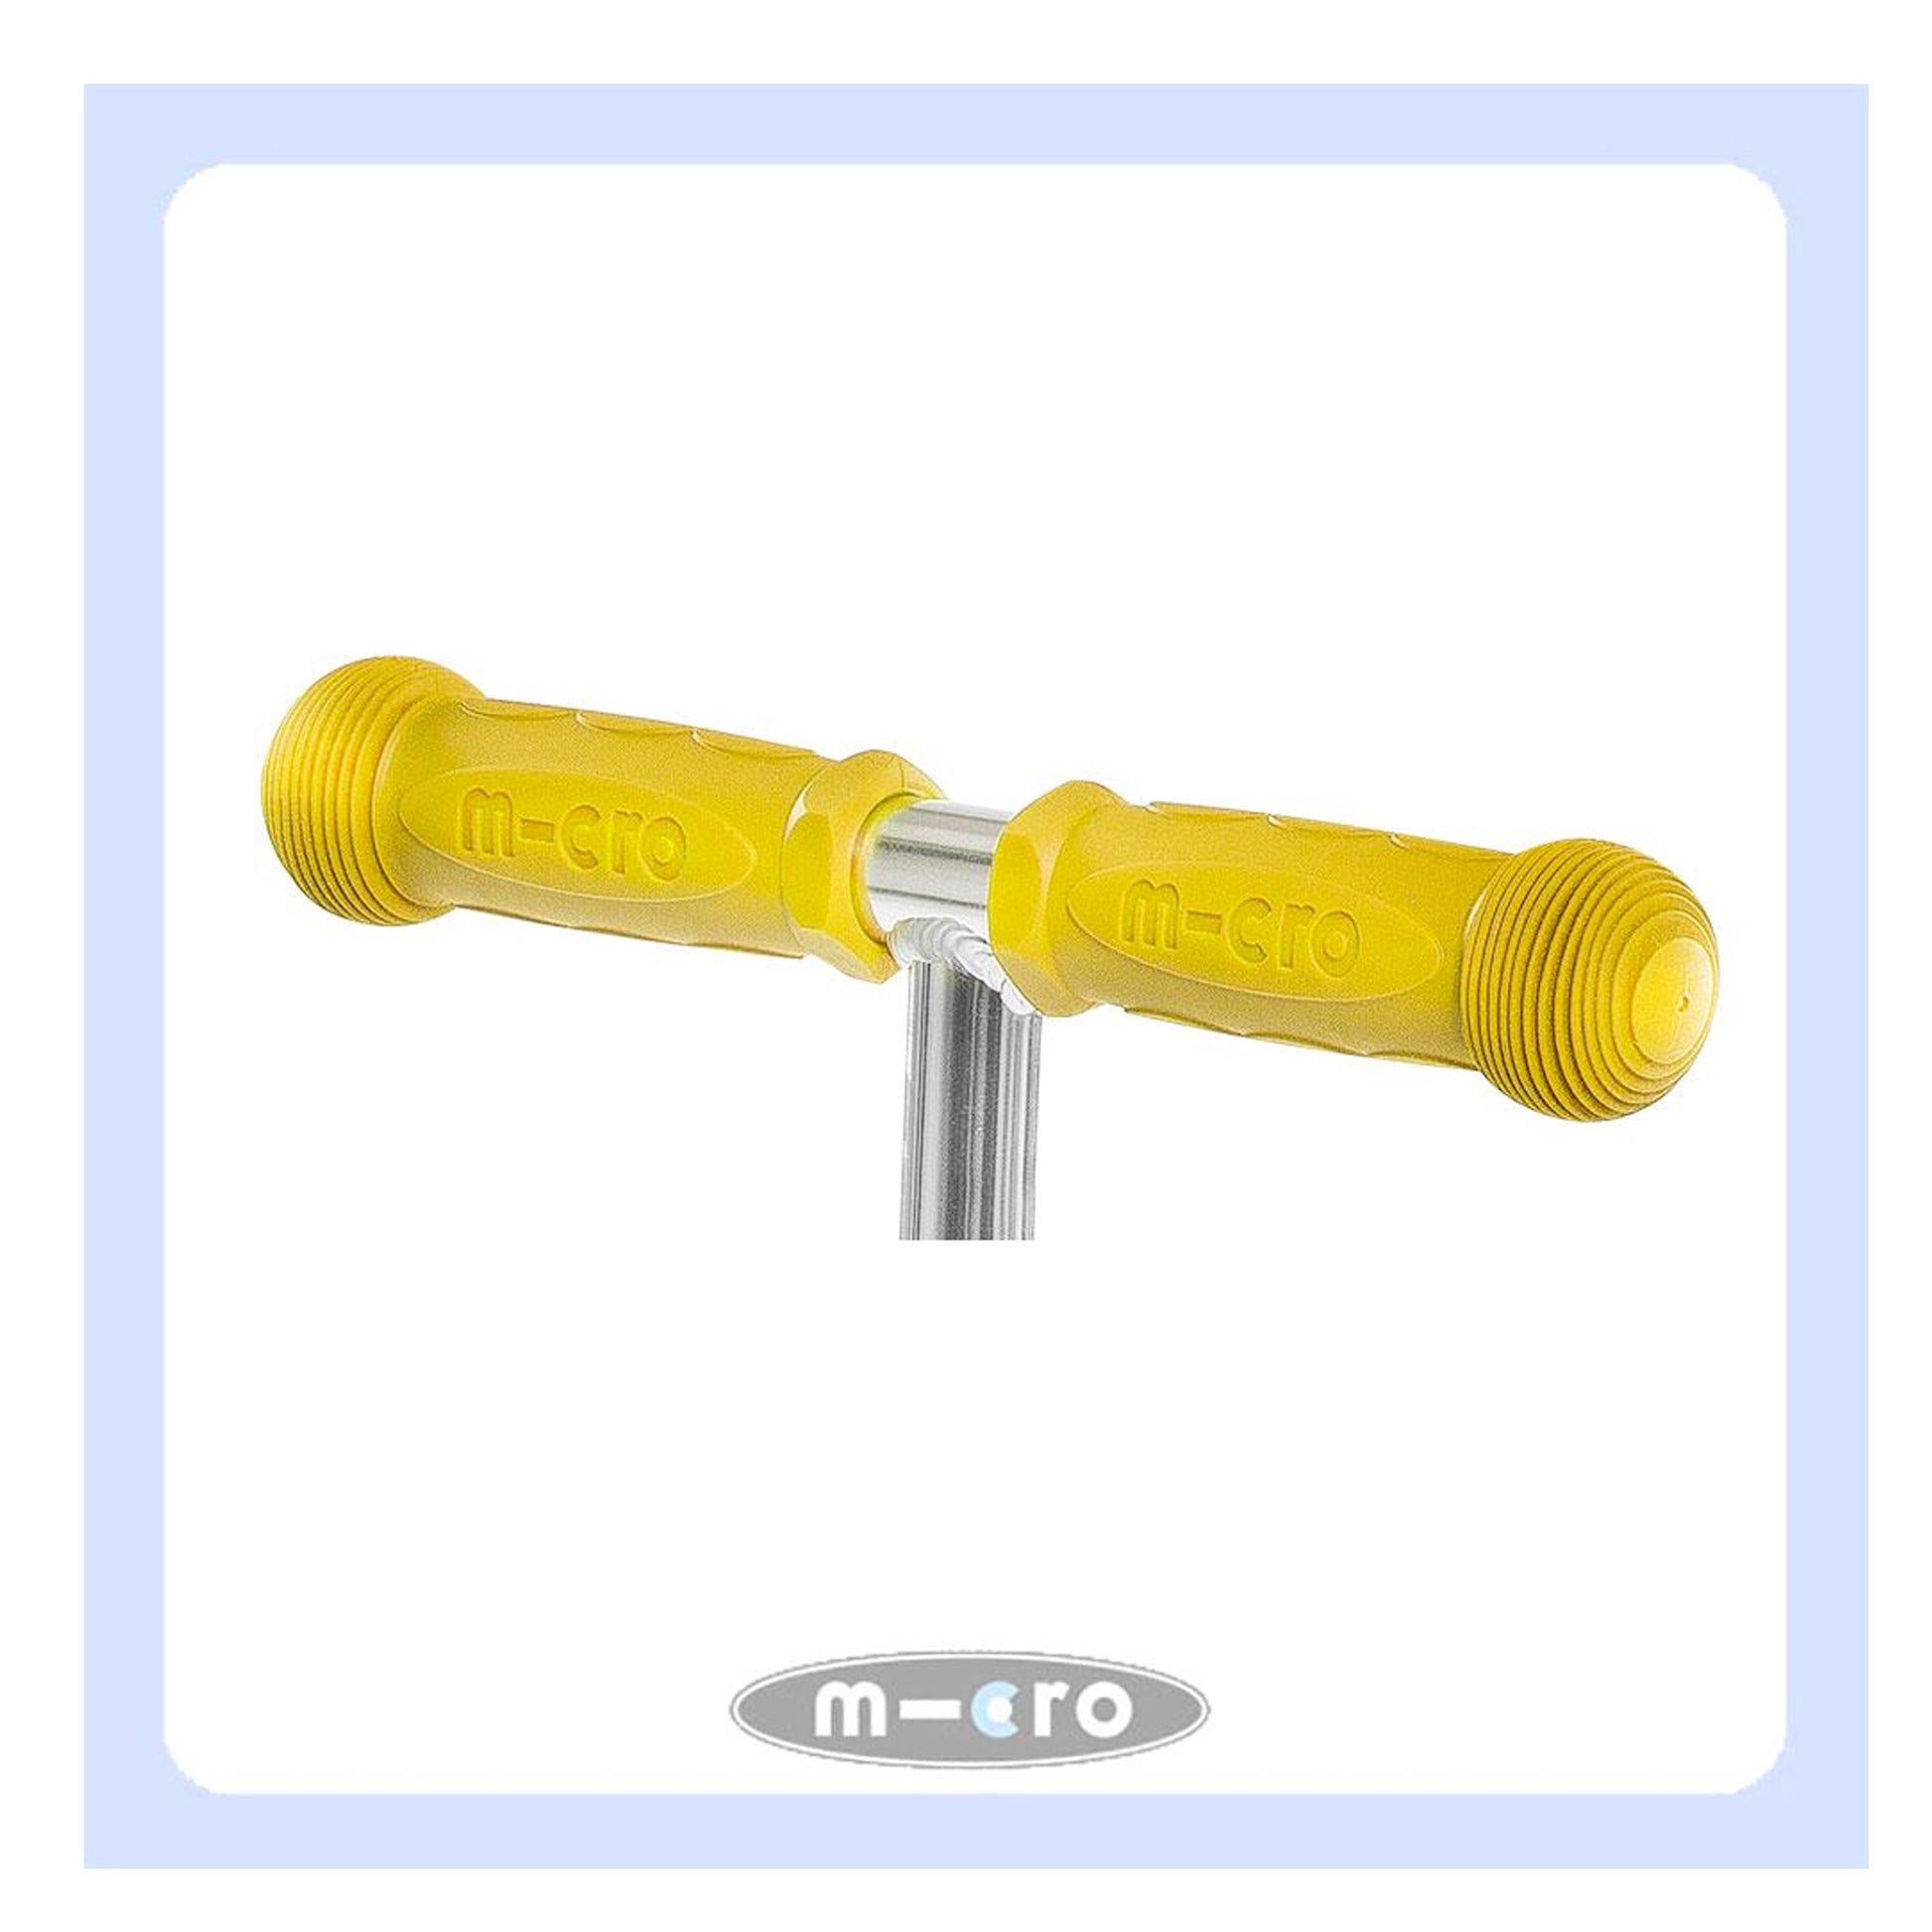 Micro Scooter Replacement Rubber Grips - Yellow buy online at Woolys Wheels Sydney